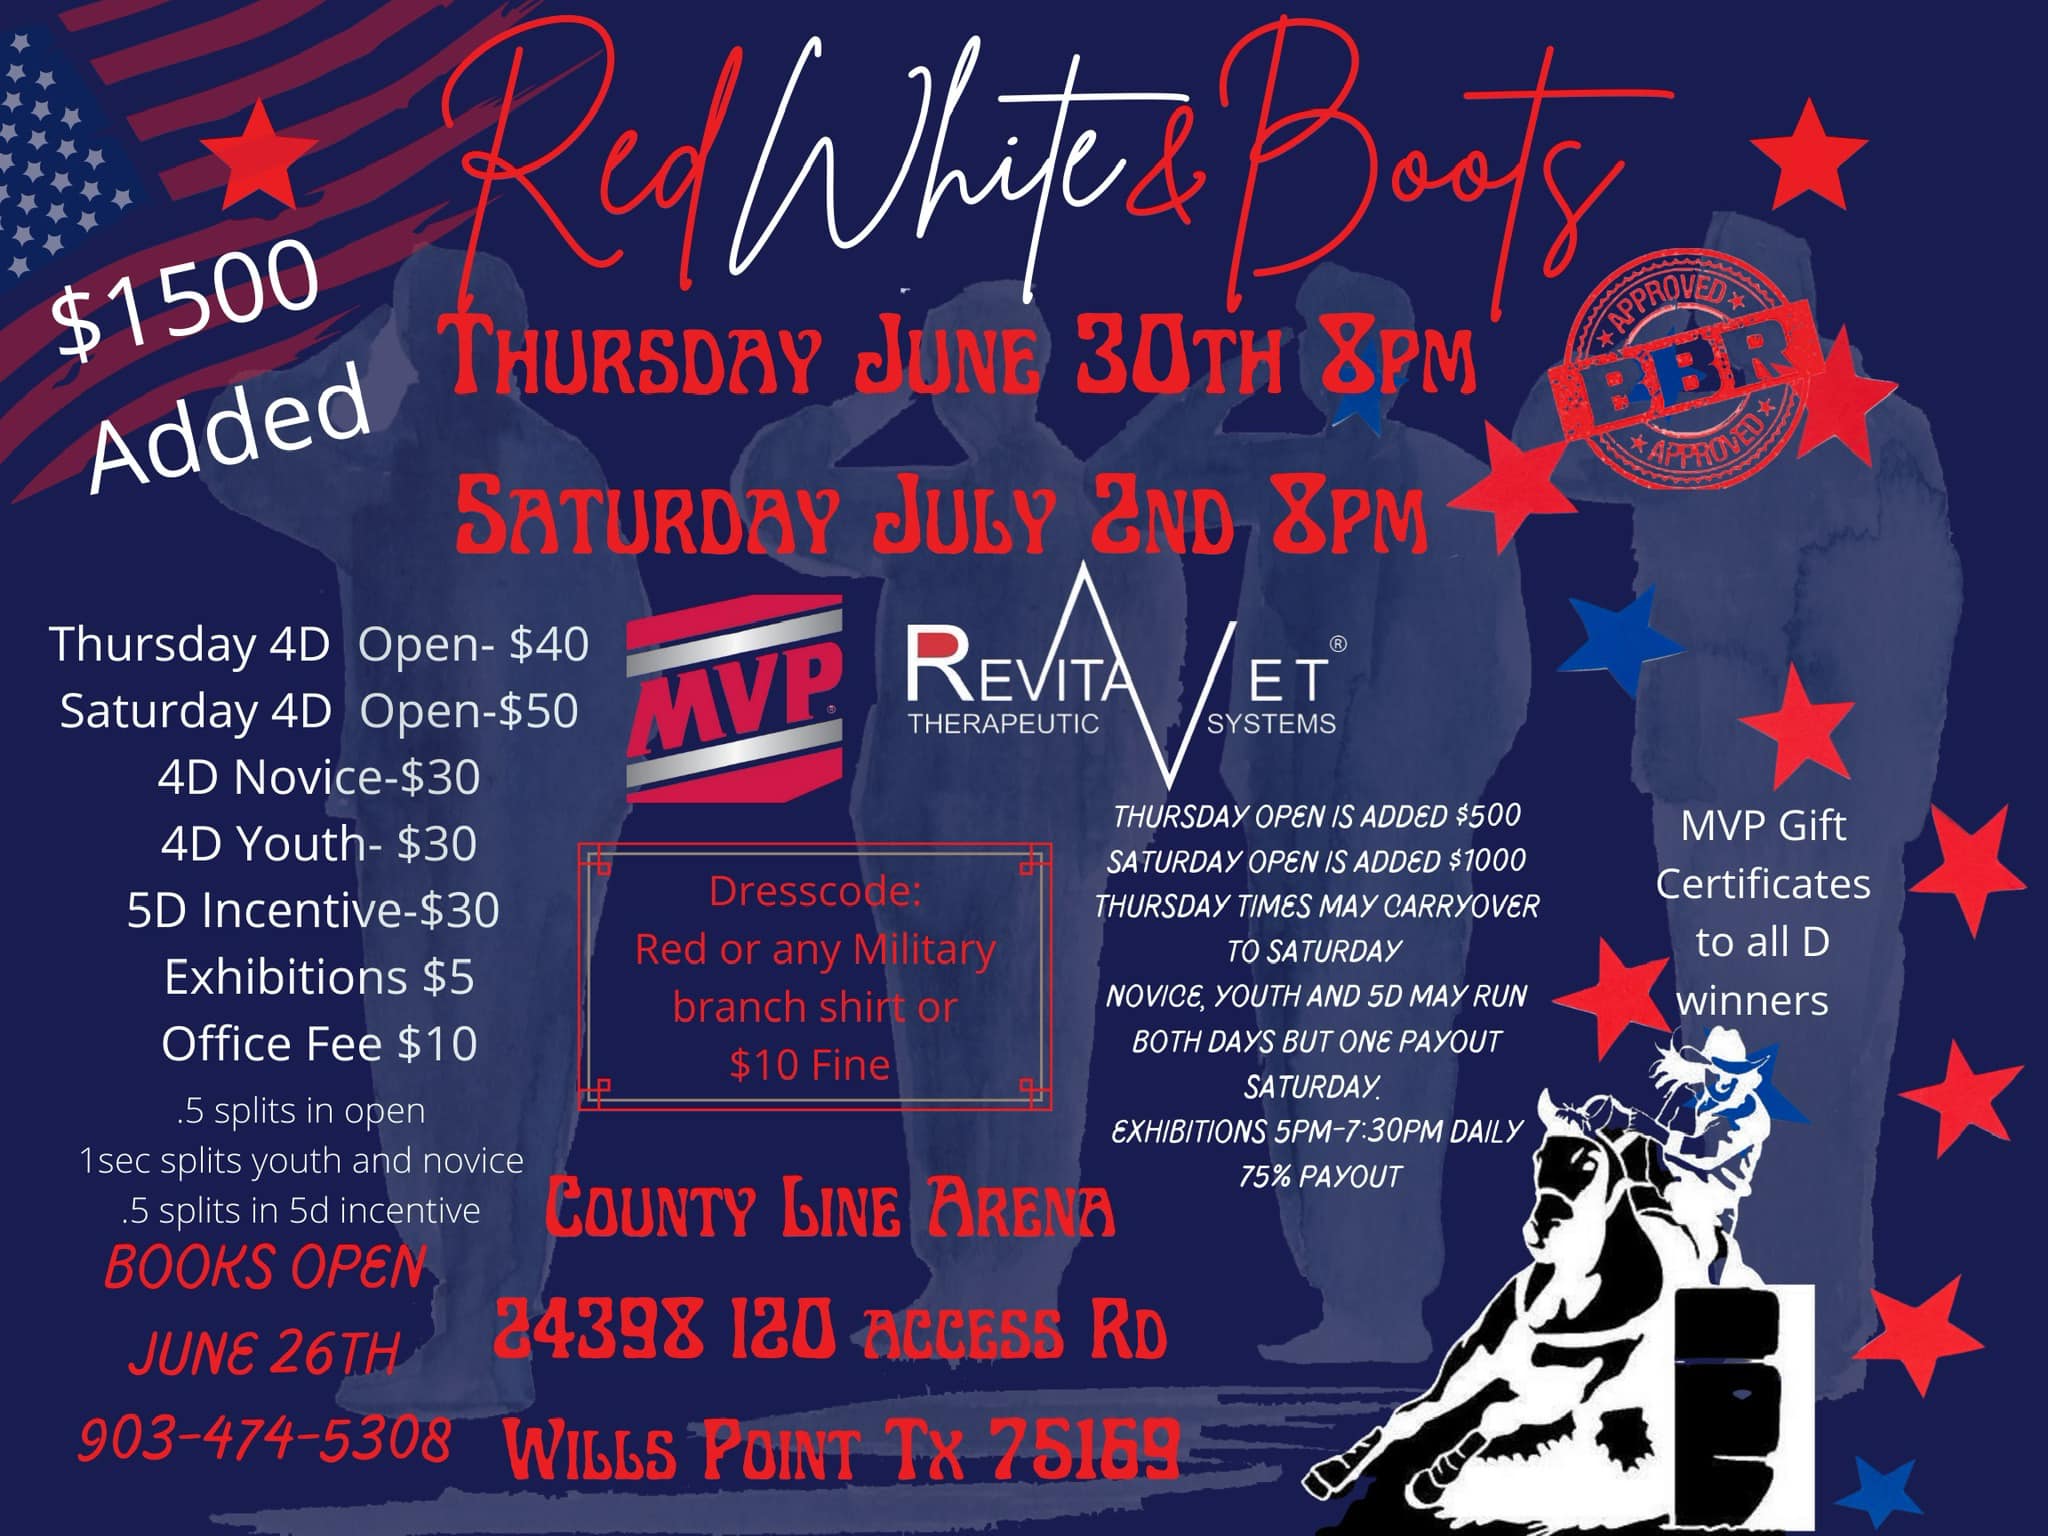 Red White and Boots Barrel Race